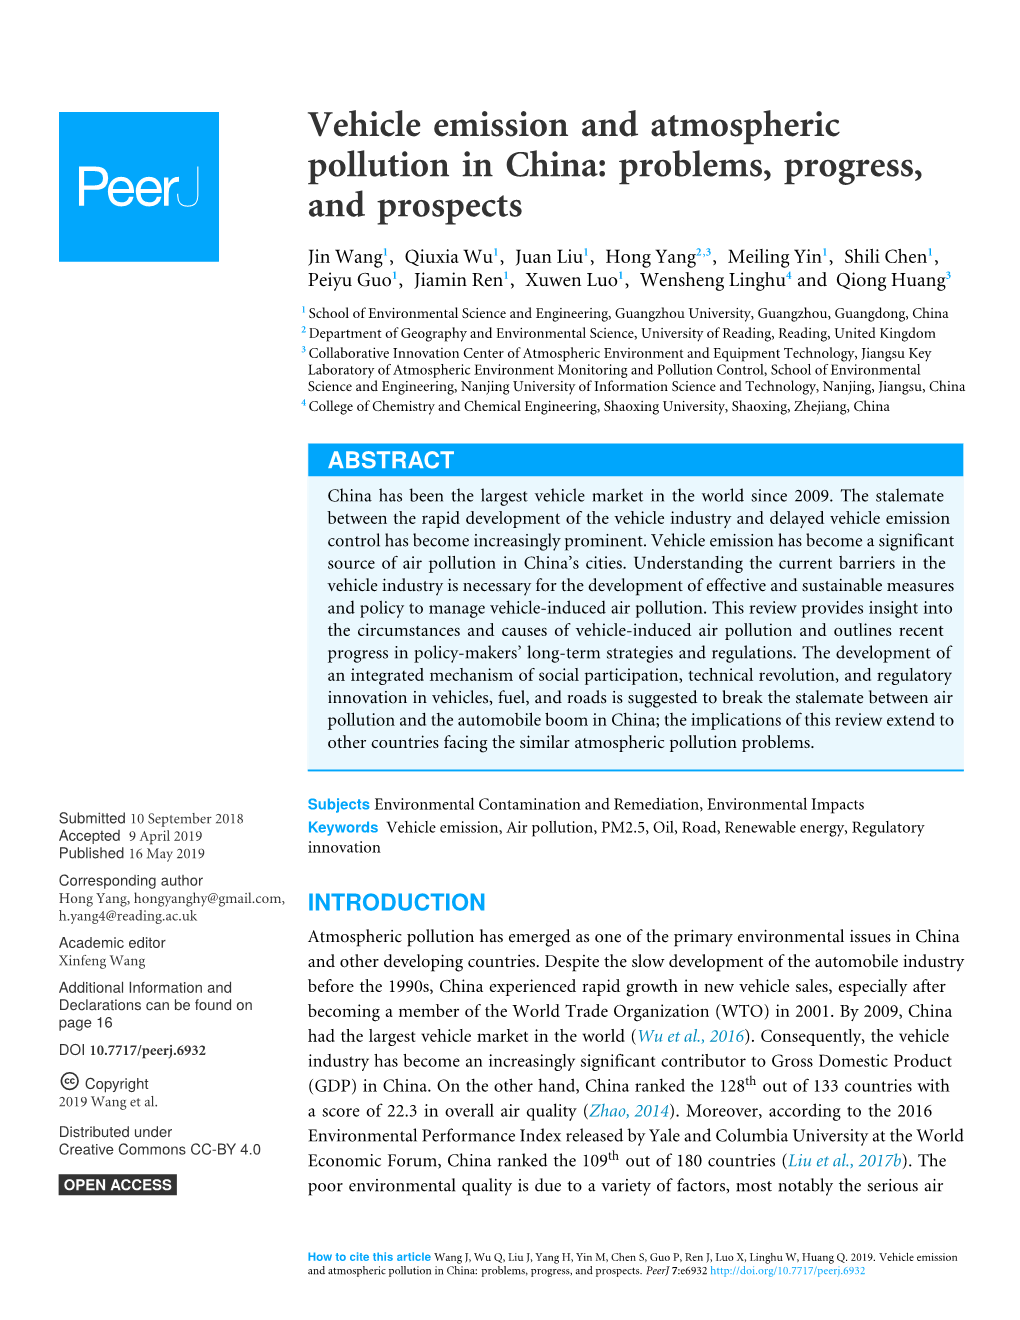 Vehicle Emission and Atmospheric Pollution in China: Problems, Progress, and Prospects